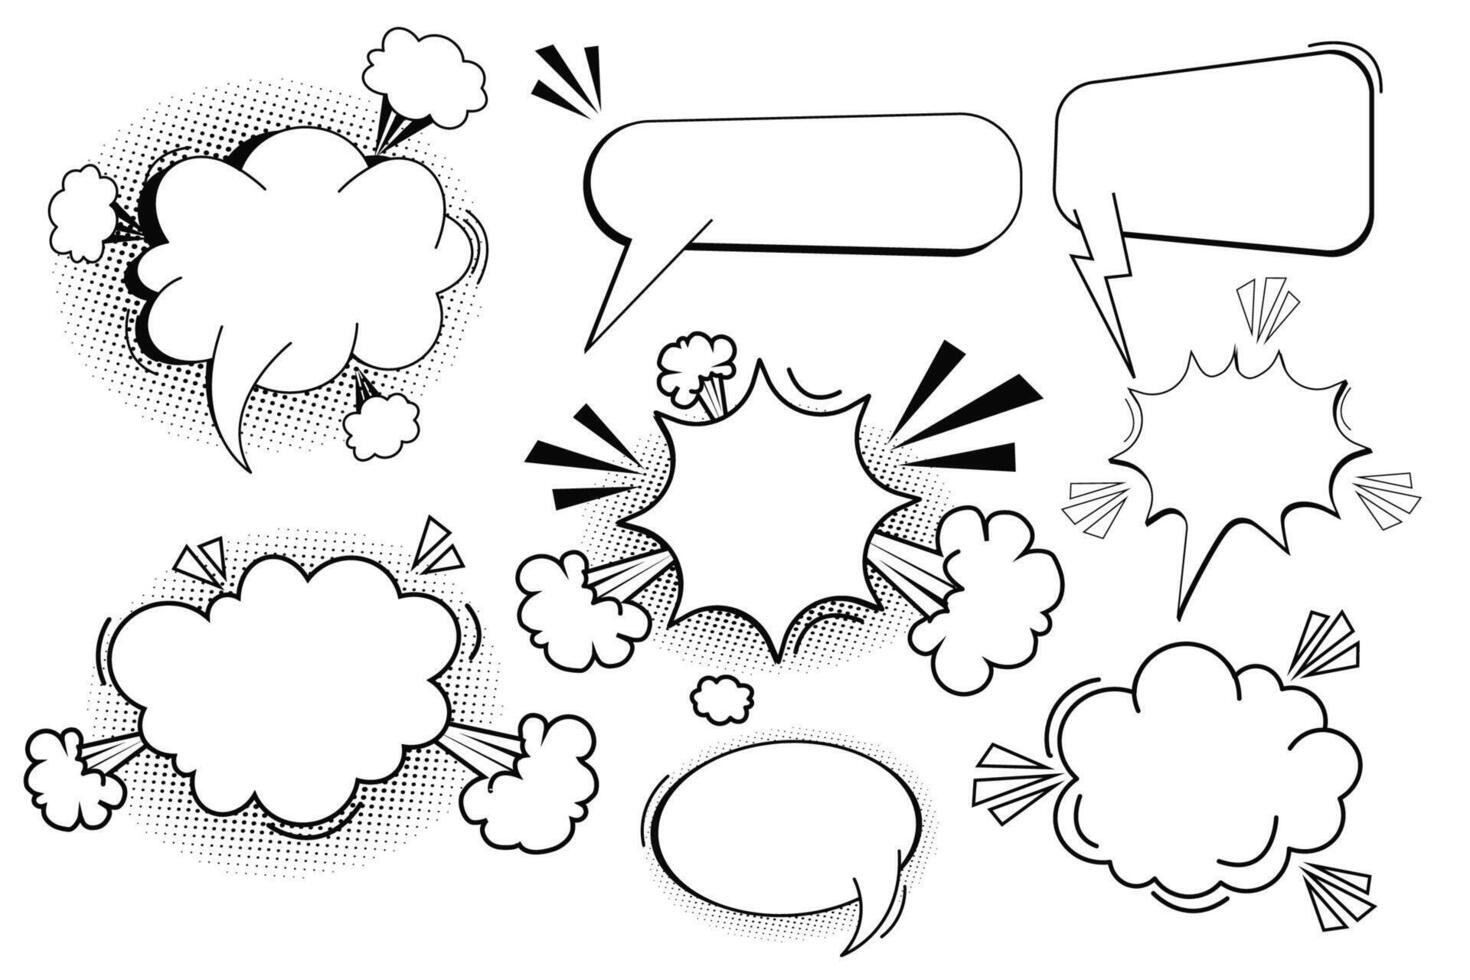 Set pow bubble speech comic expression frame cartoon doodle isolated on white background. Boom explode effect, halftone decoration,. illustration vector